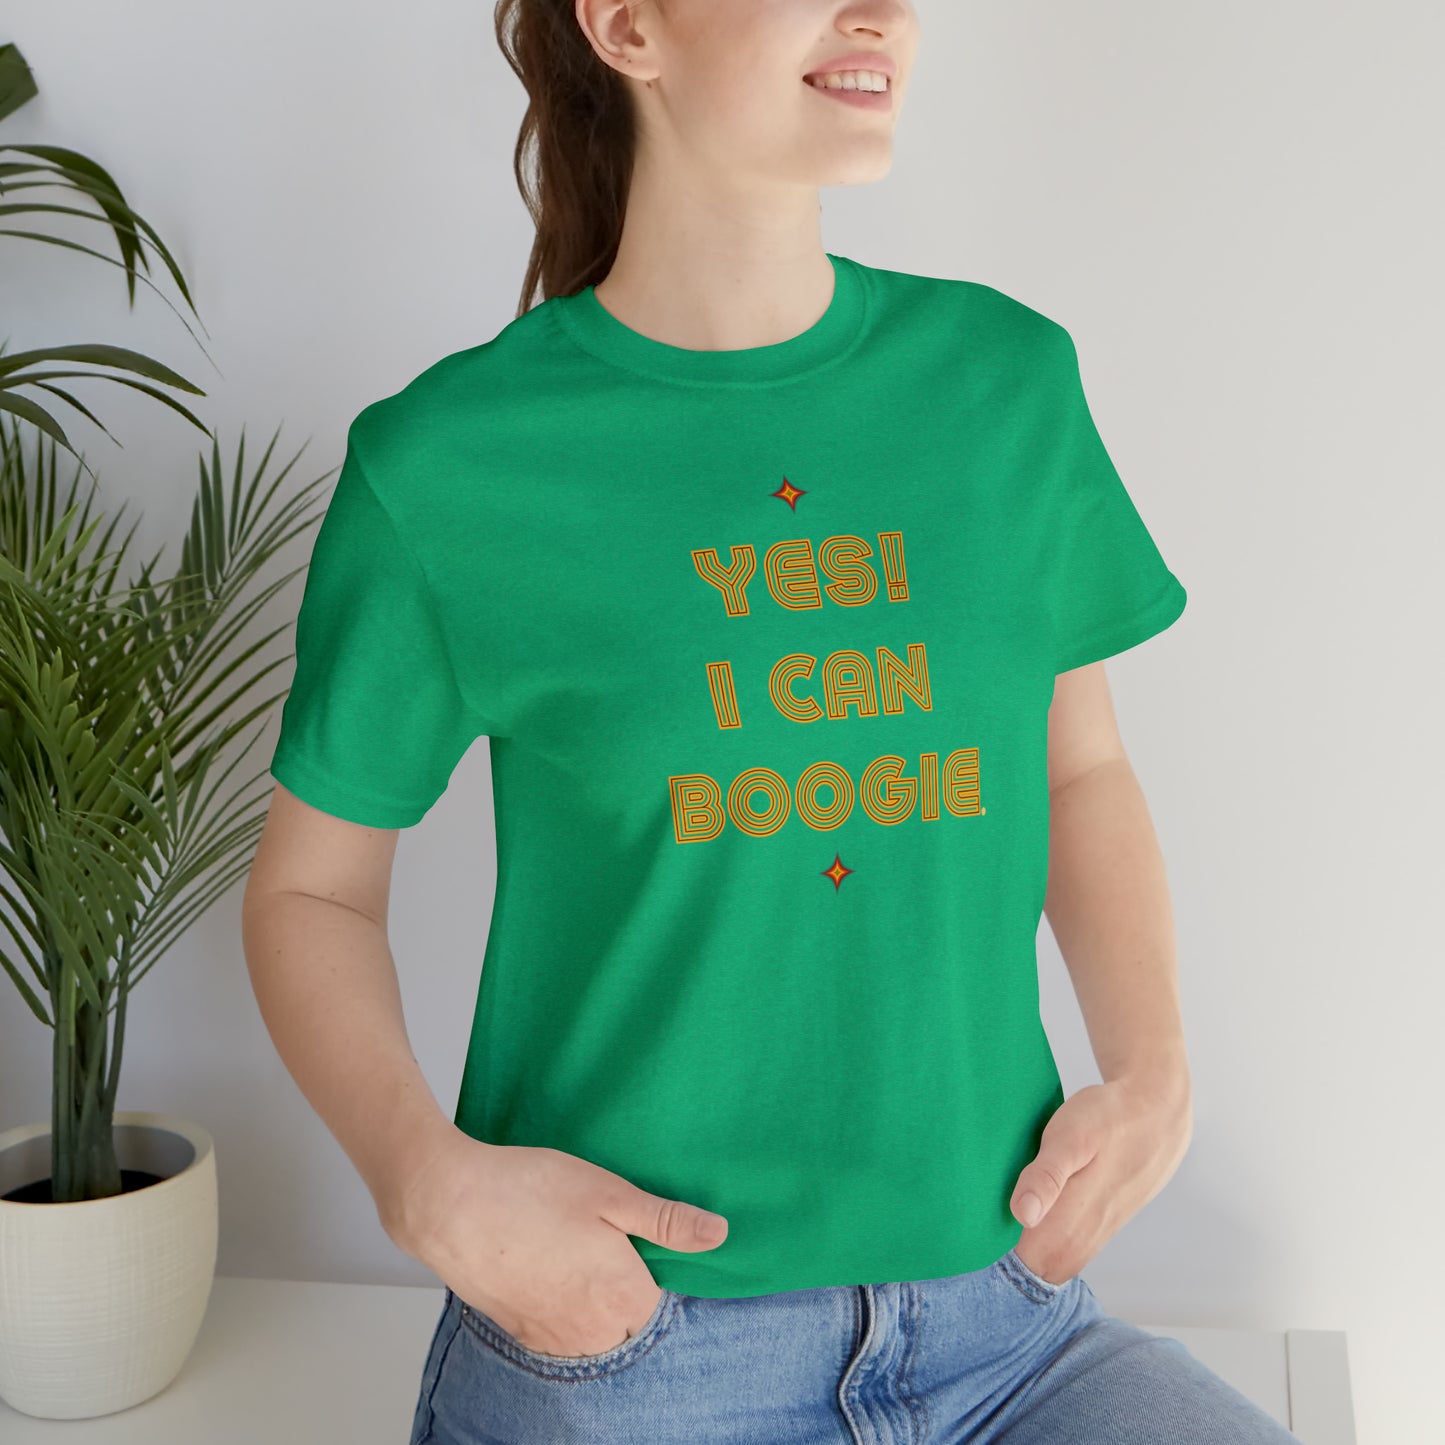 Dance, I Can Boogie, Retro Disco Dance, Words- Adult, Regular Fit, Soft Cotton, Smaller Size Image, T-shirt